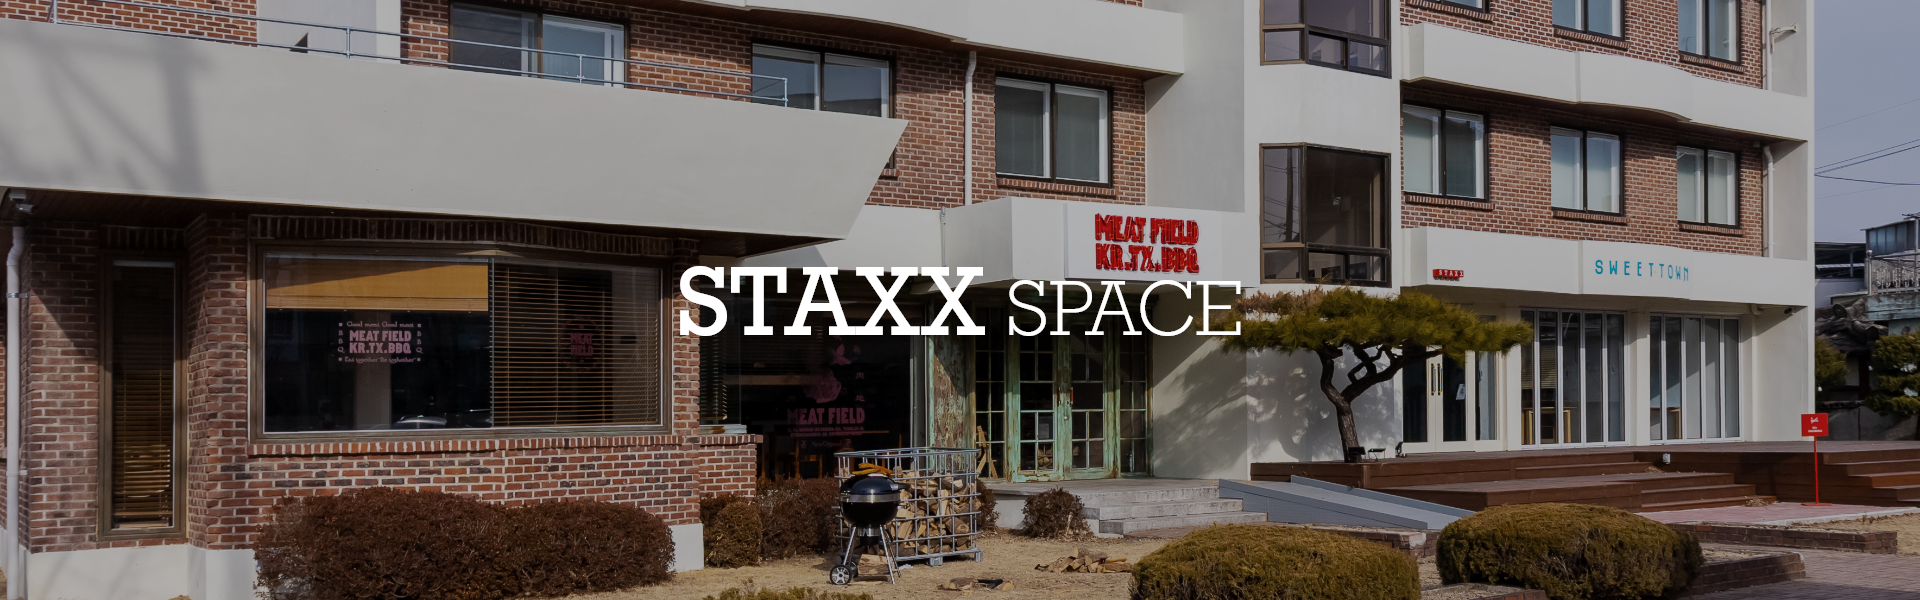 STAXX SPACE